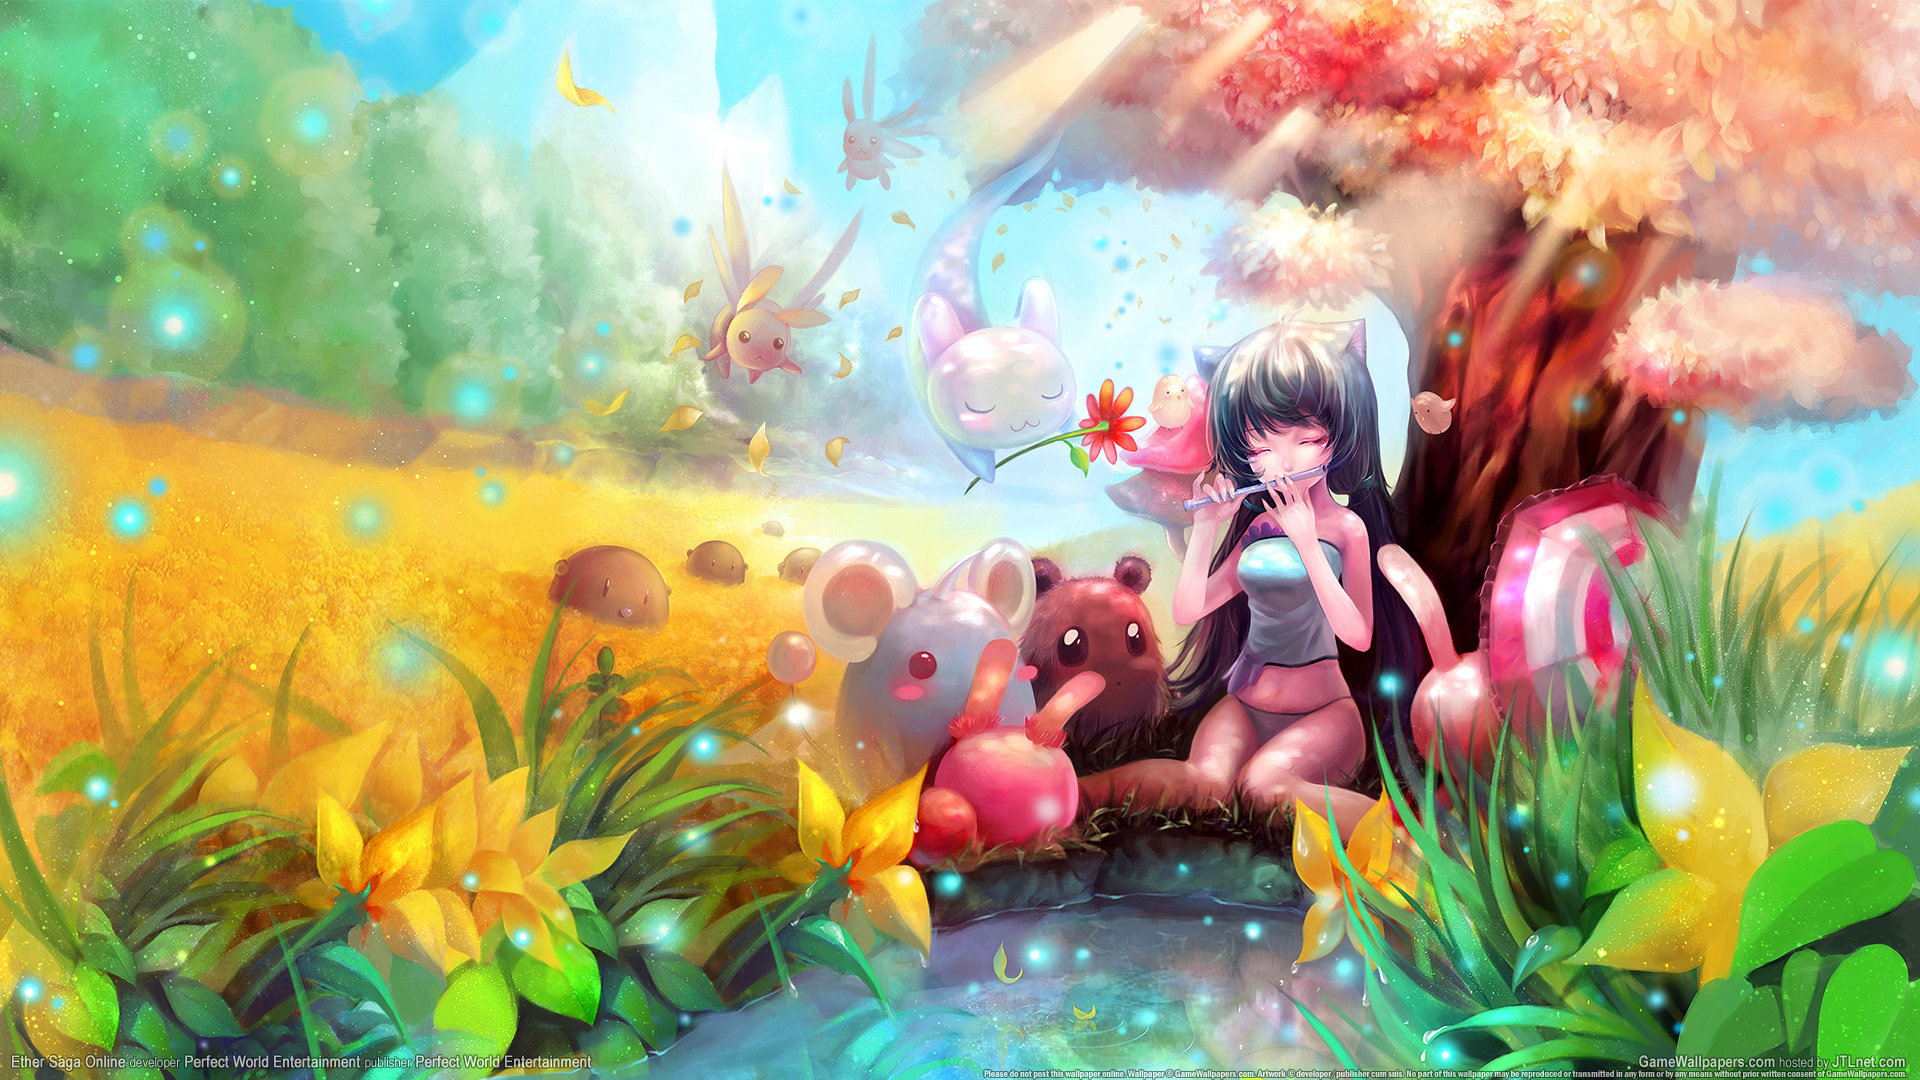 Cool Anime Wallpapers 1920x1080 Full Hd 1080p Desktop Backgrounds